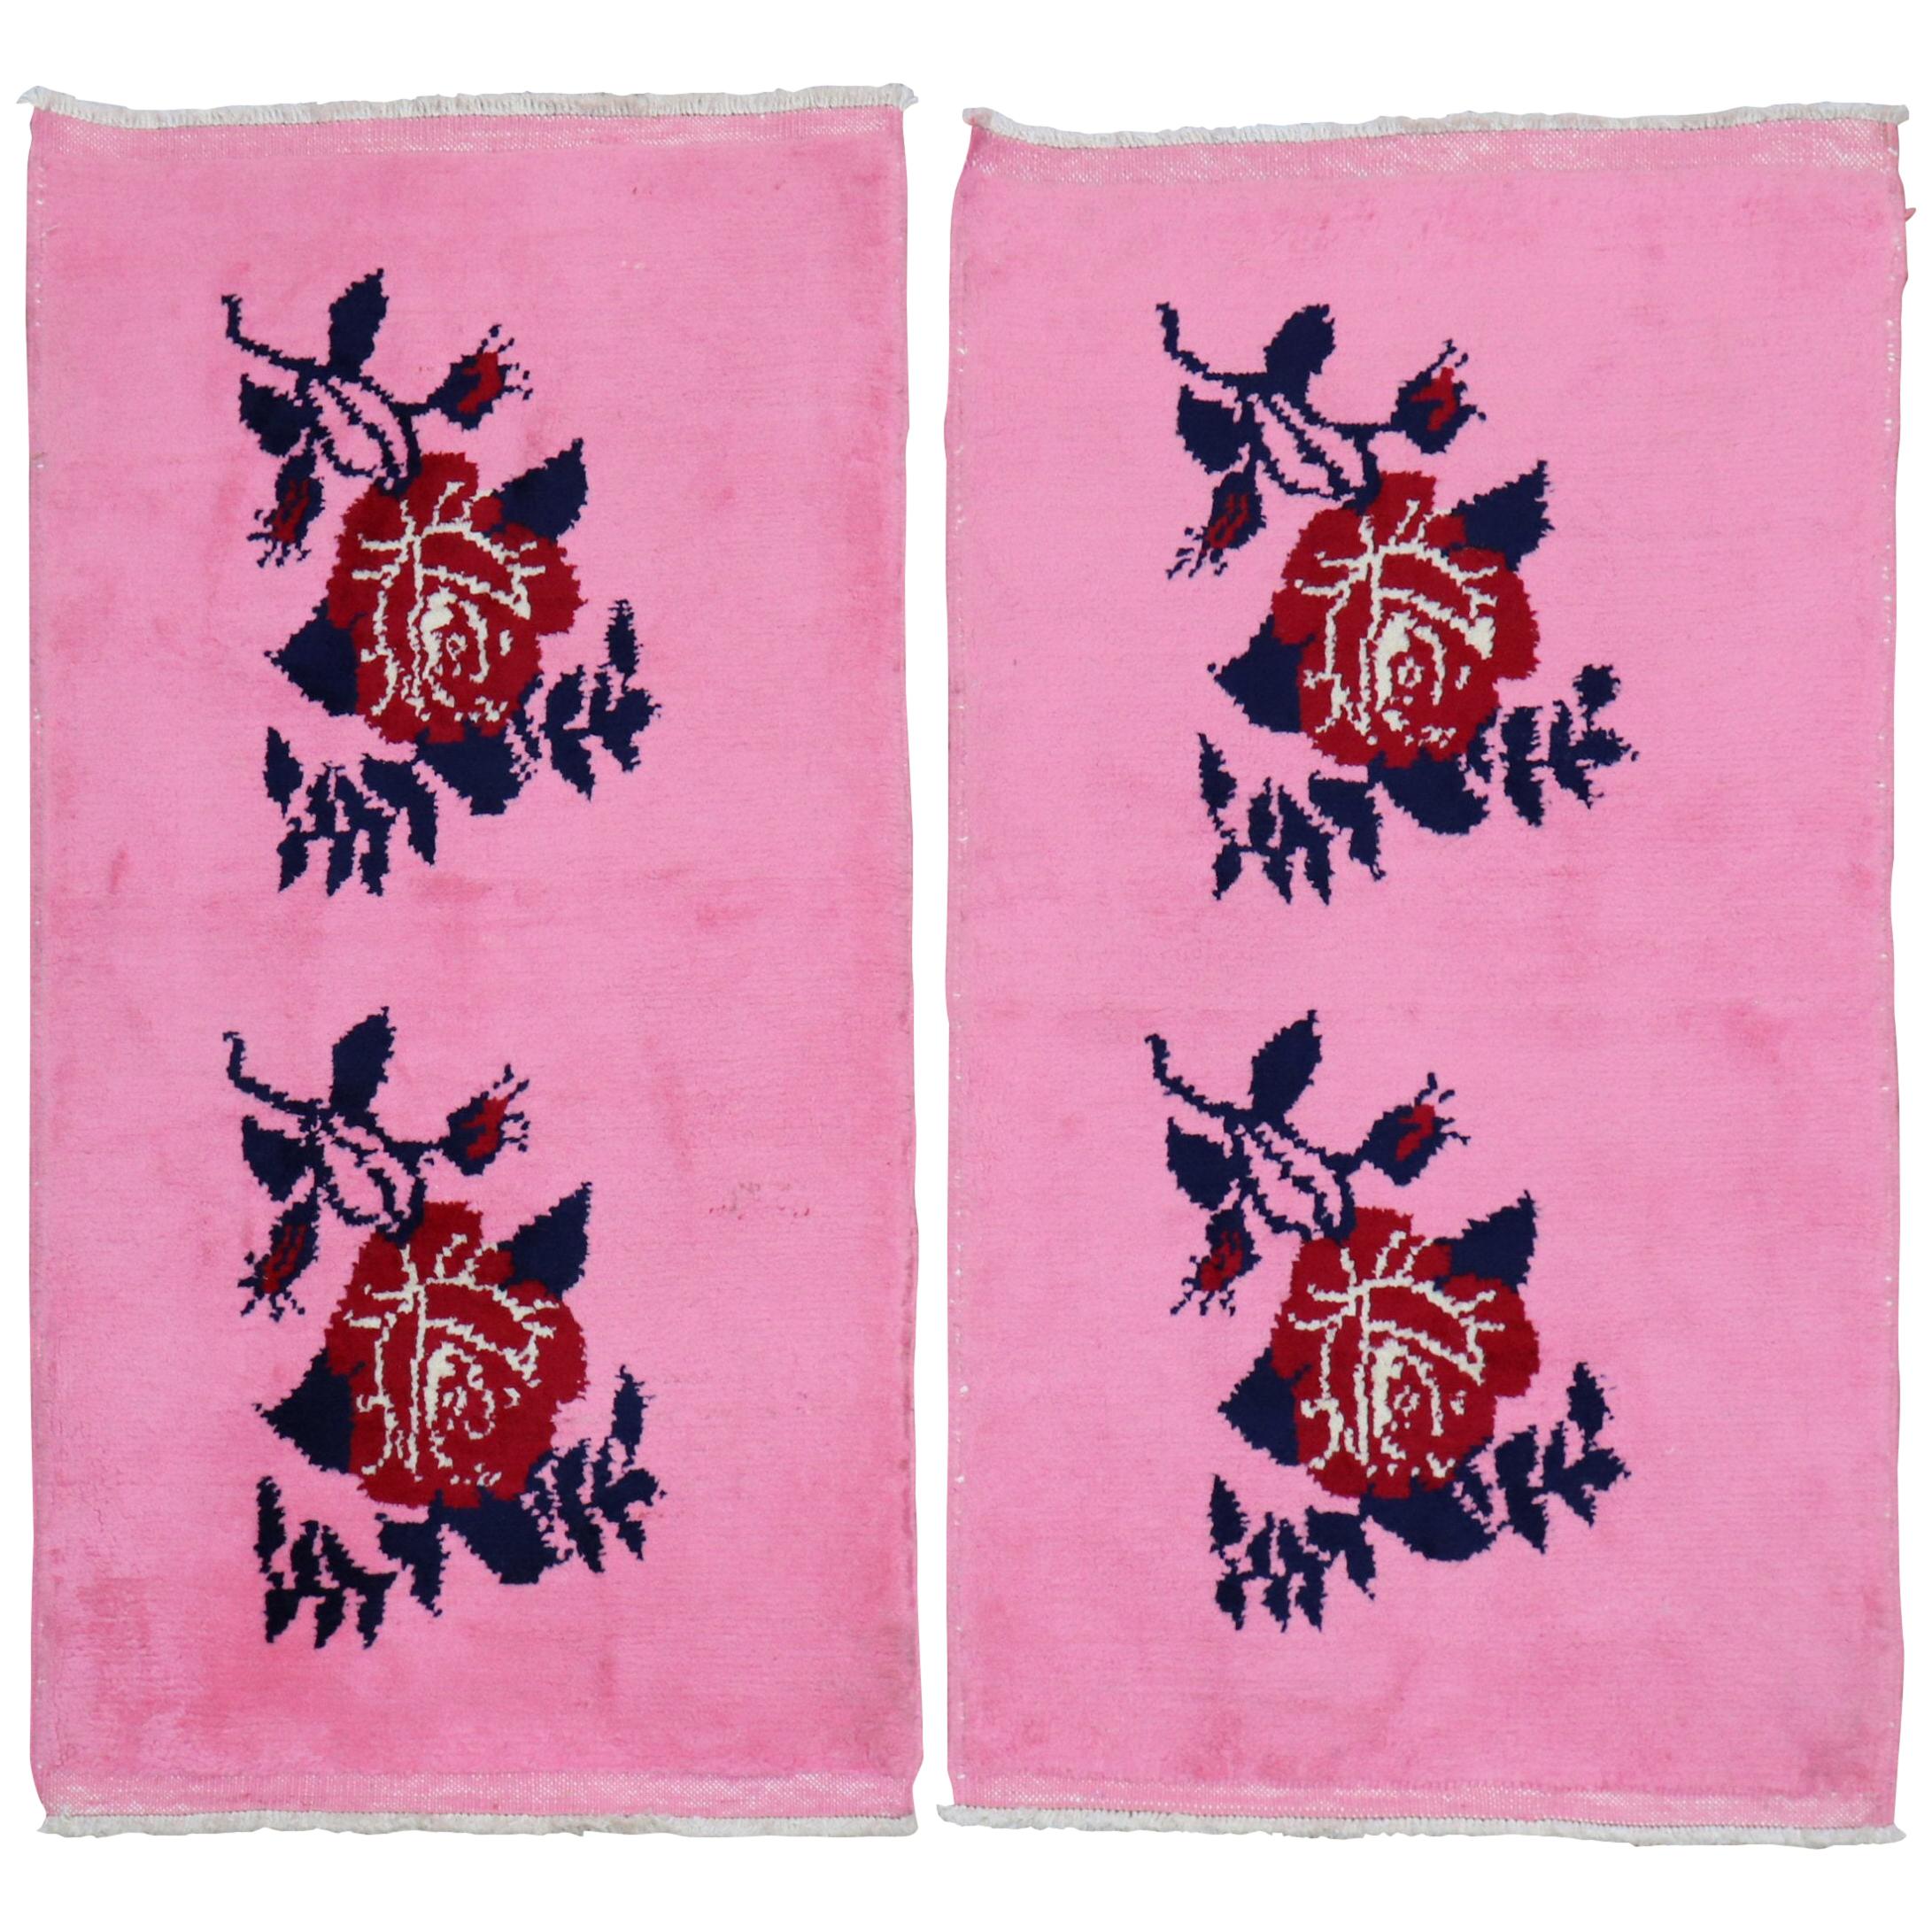 Bright Pink Floral Motif Vintage Turkish Rugs, Late 20th Century / Set of 2